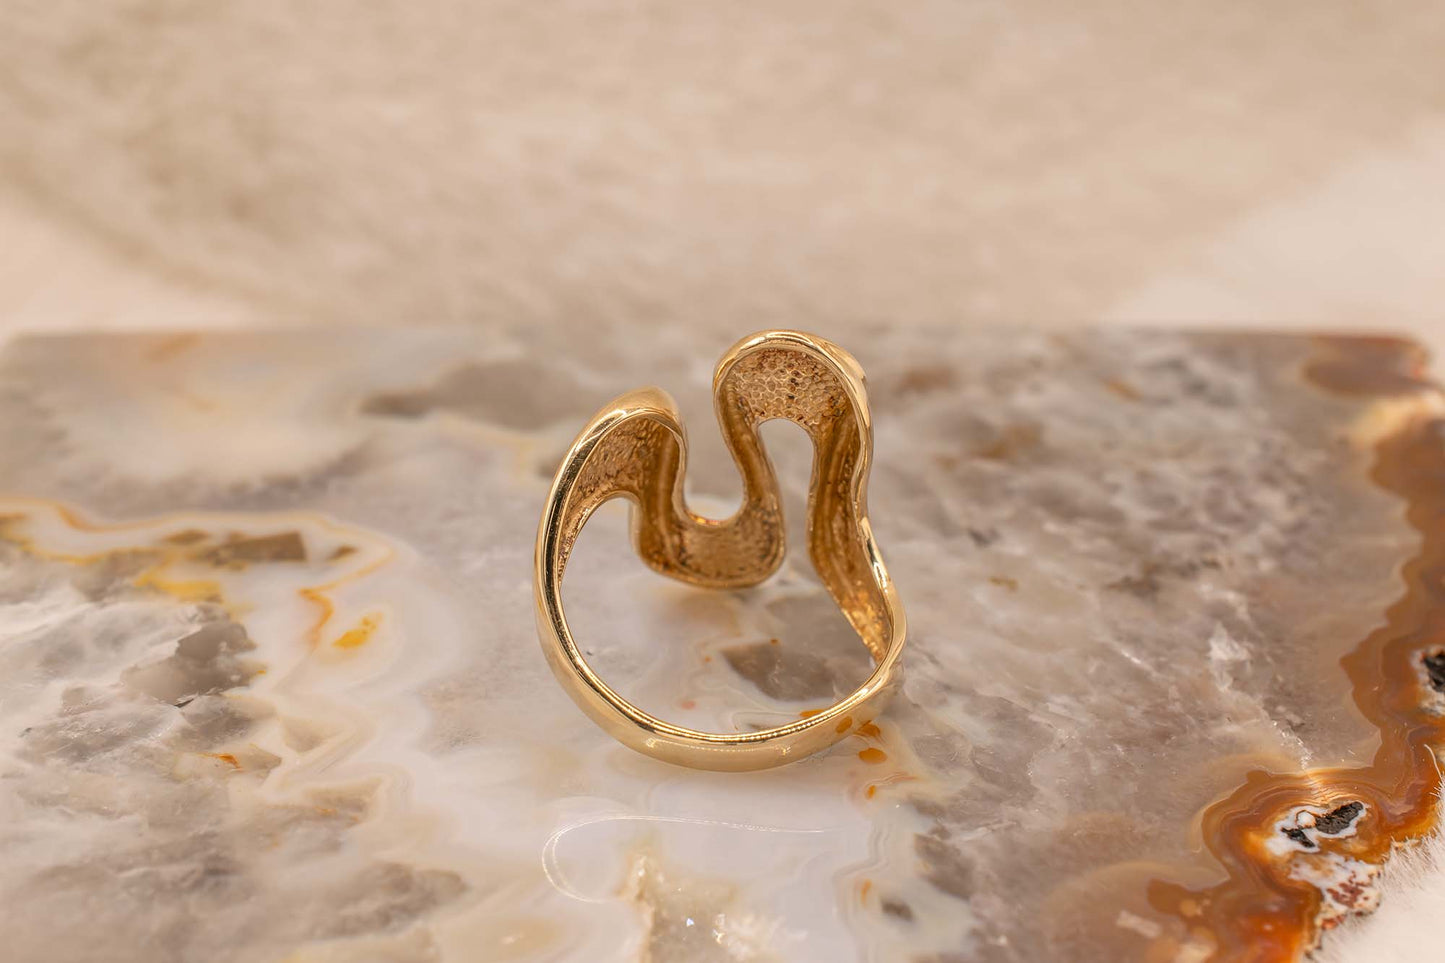 Vintage Estate Mid-Century Inspired 14k Yellow Gold Abstract Wave Design Ring Size 8